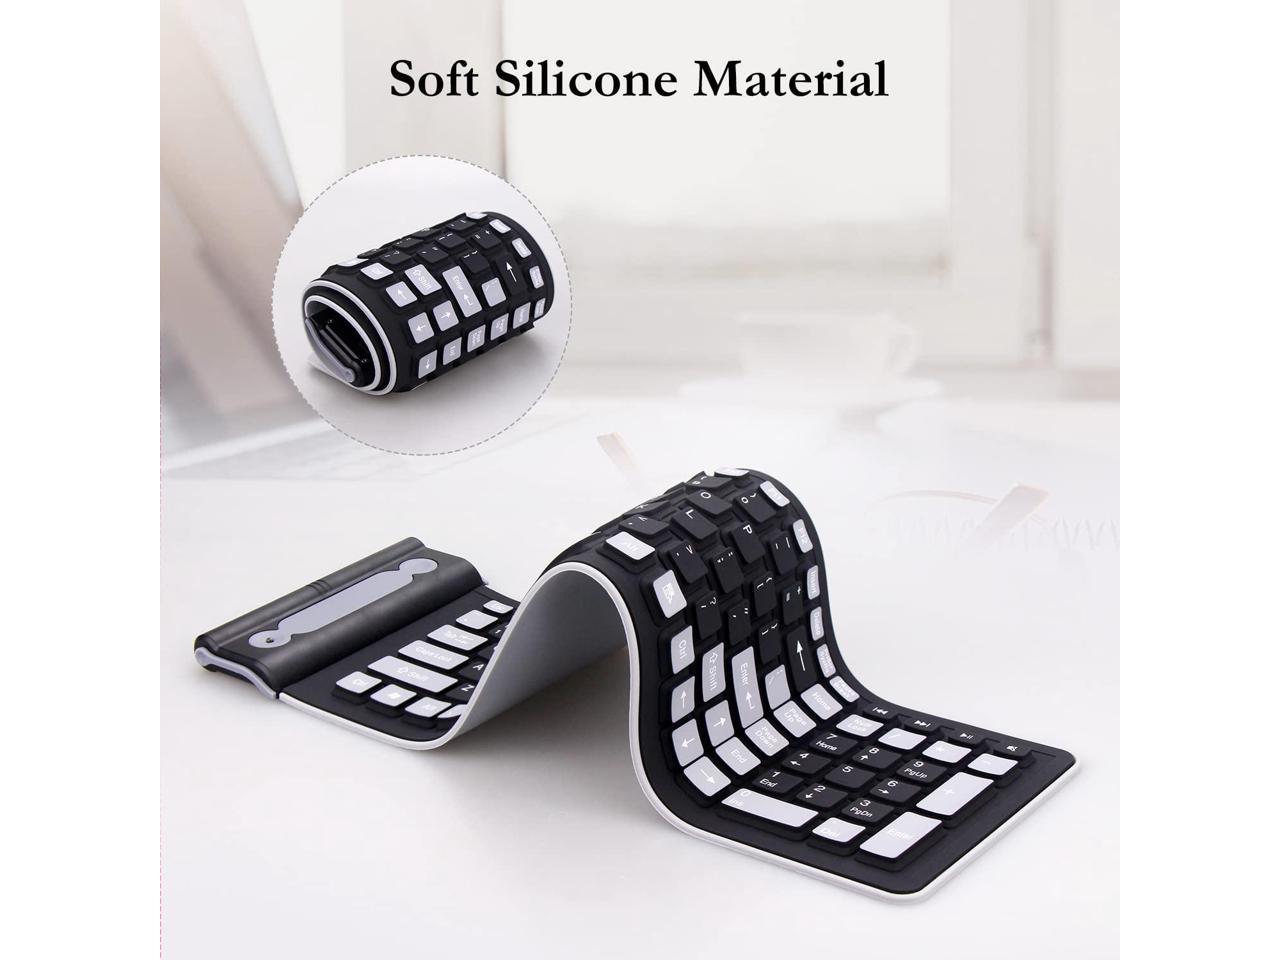 Wireless Silicone Keyboard, 2.4GHz Wireless, Foldable Rollup Keyboard, Waterproof, Dustproof and Lightweight, Perfect for PC, Notebook, Laptop and Travel keypad